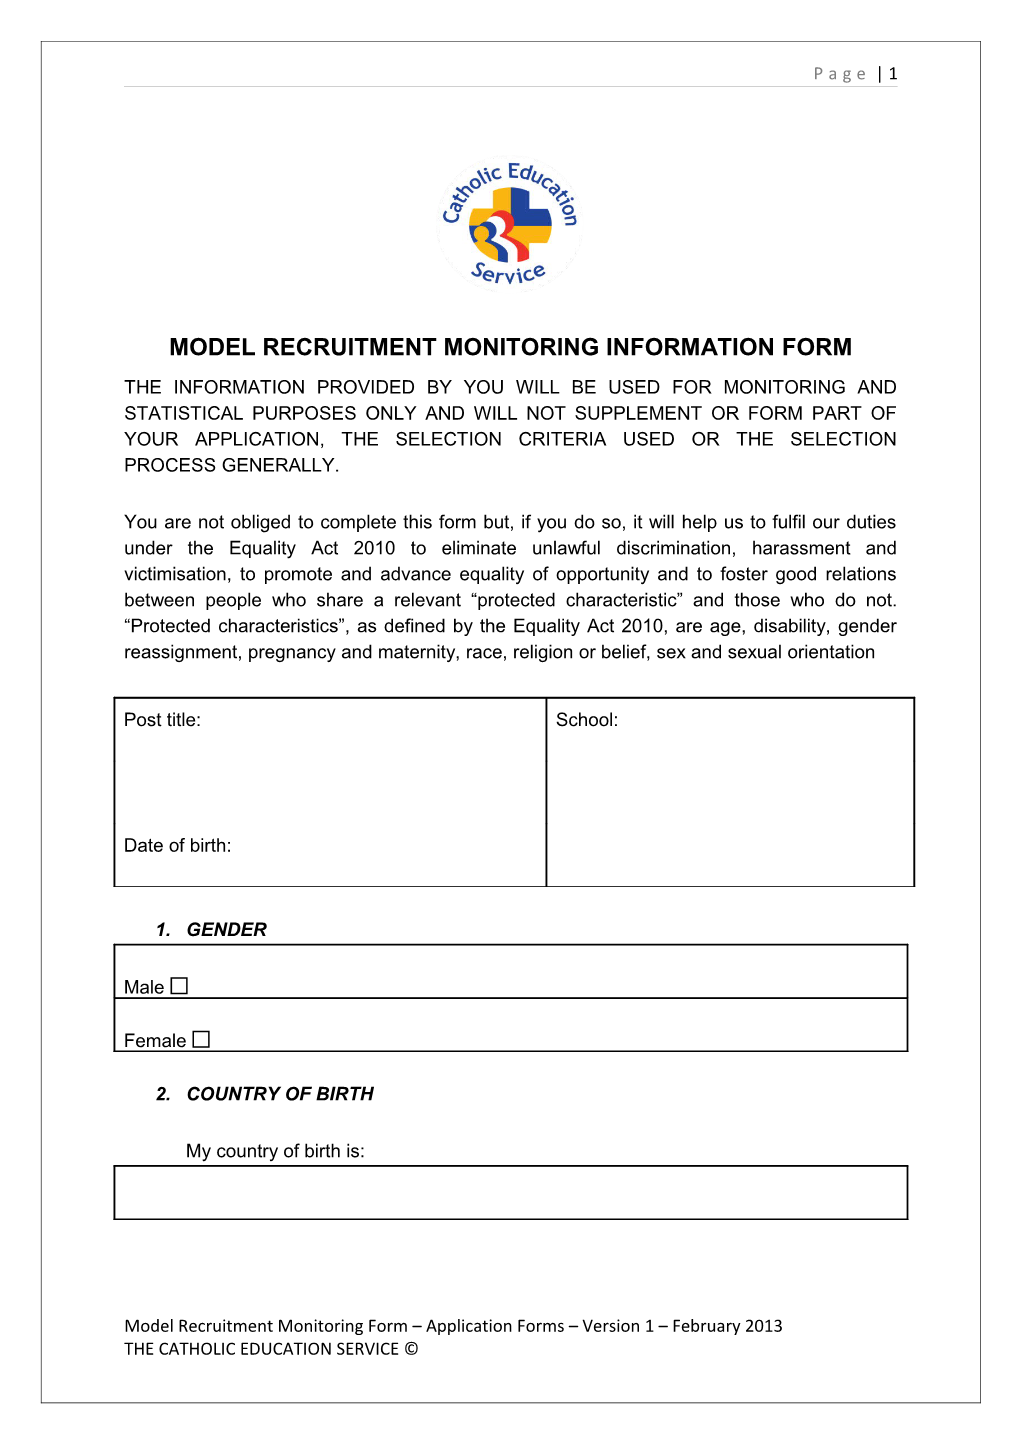 Model Recruitment Monitoring Information Form s1